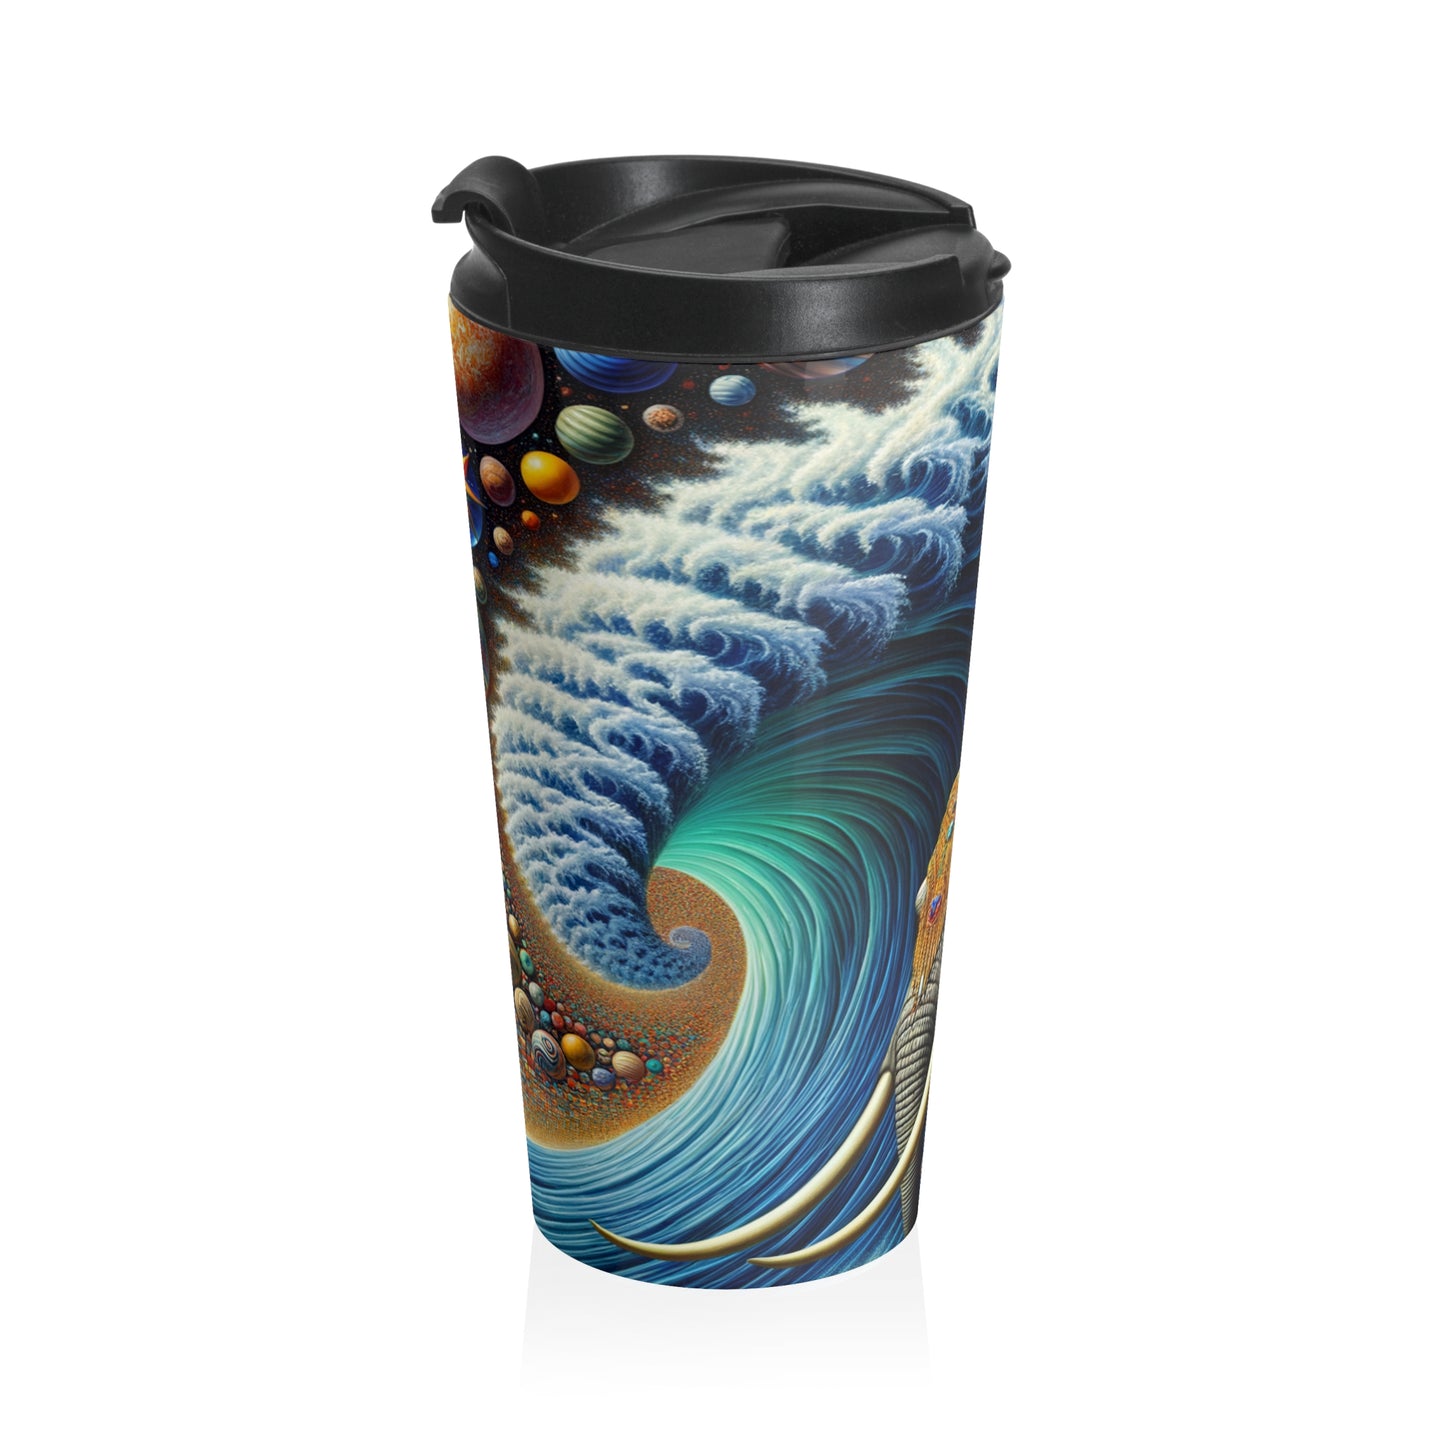 "The Wondrous Ride" - The Alien Stainless Steel Travel Mug Surrealism Style